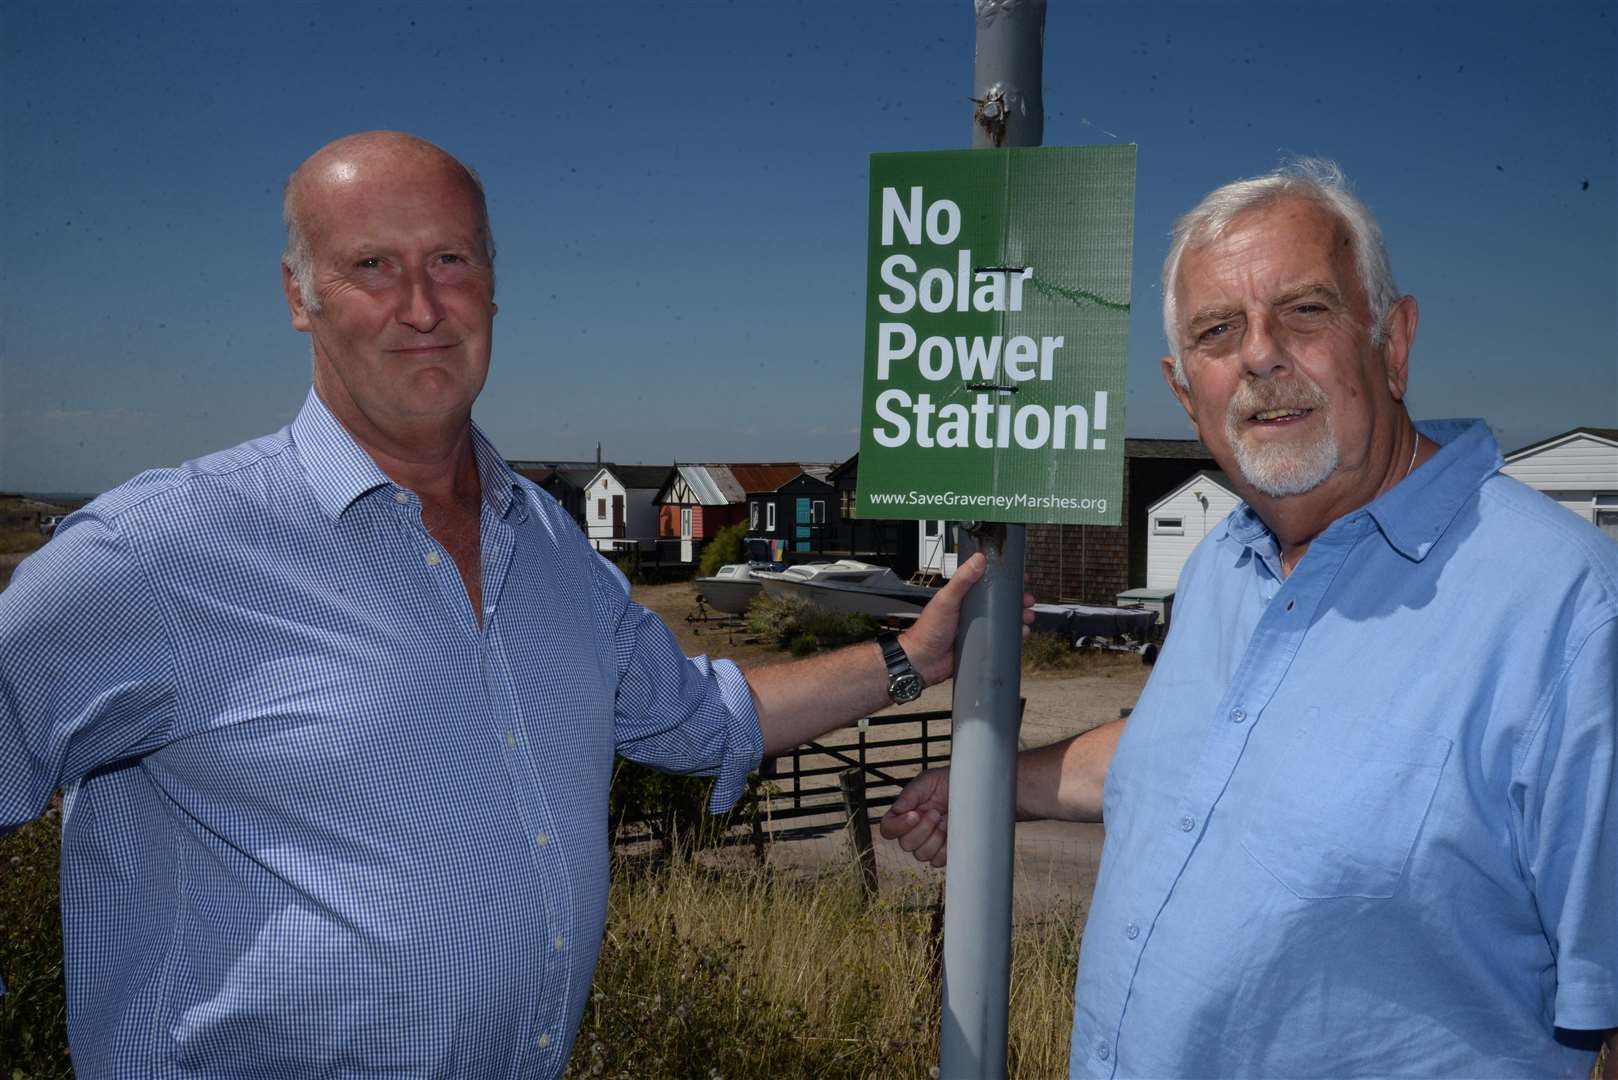 Cllrs Ashley Clark and Colin Spooner who have written a letter to Greg Clark MP in opposition to the Cleve Hill Solar Park between Whitstable and Faversham. Picture: Chris Davey